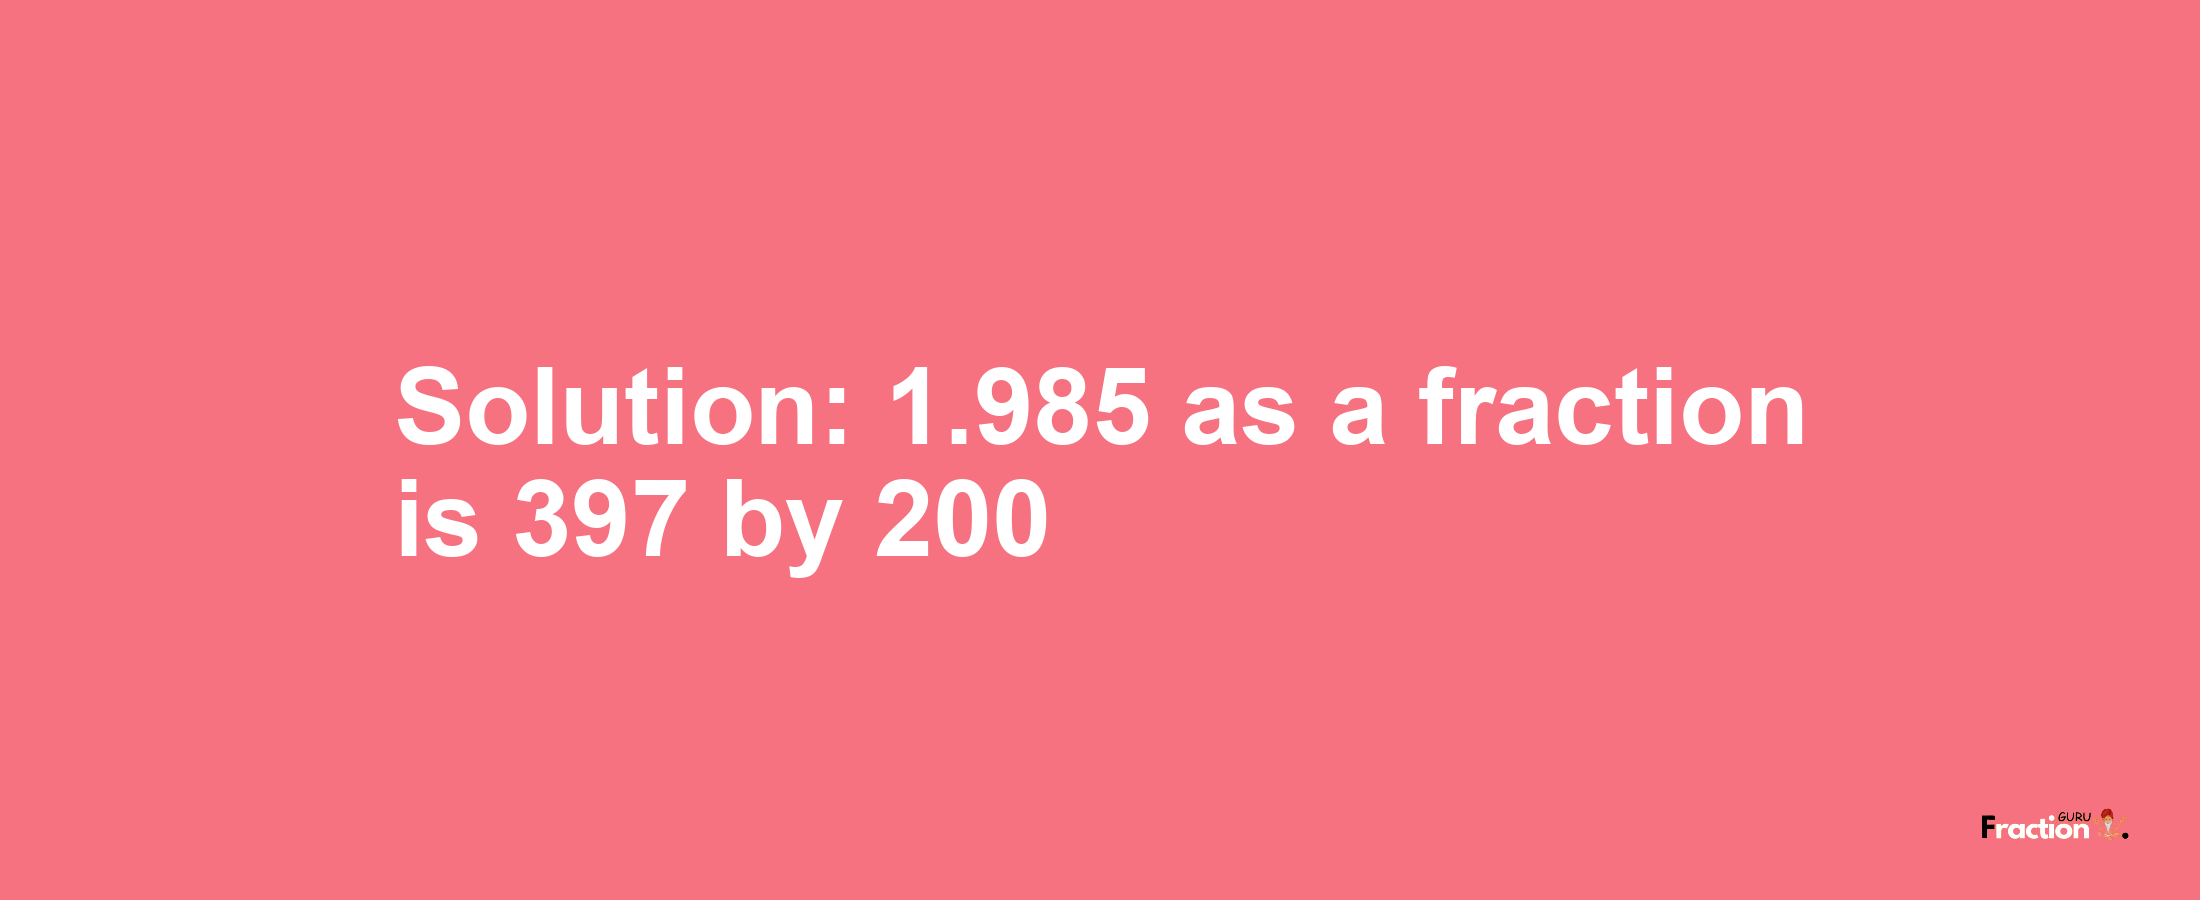 Solution:1.985 as a fraction is 397/200